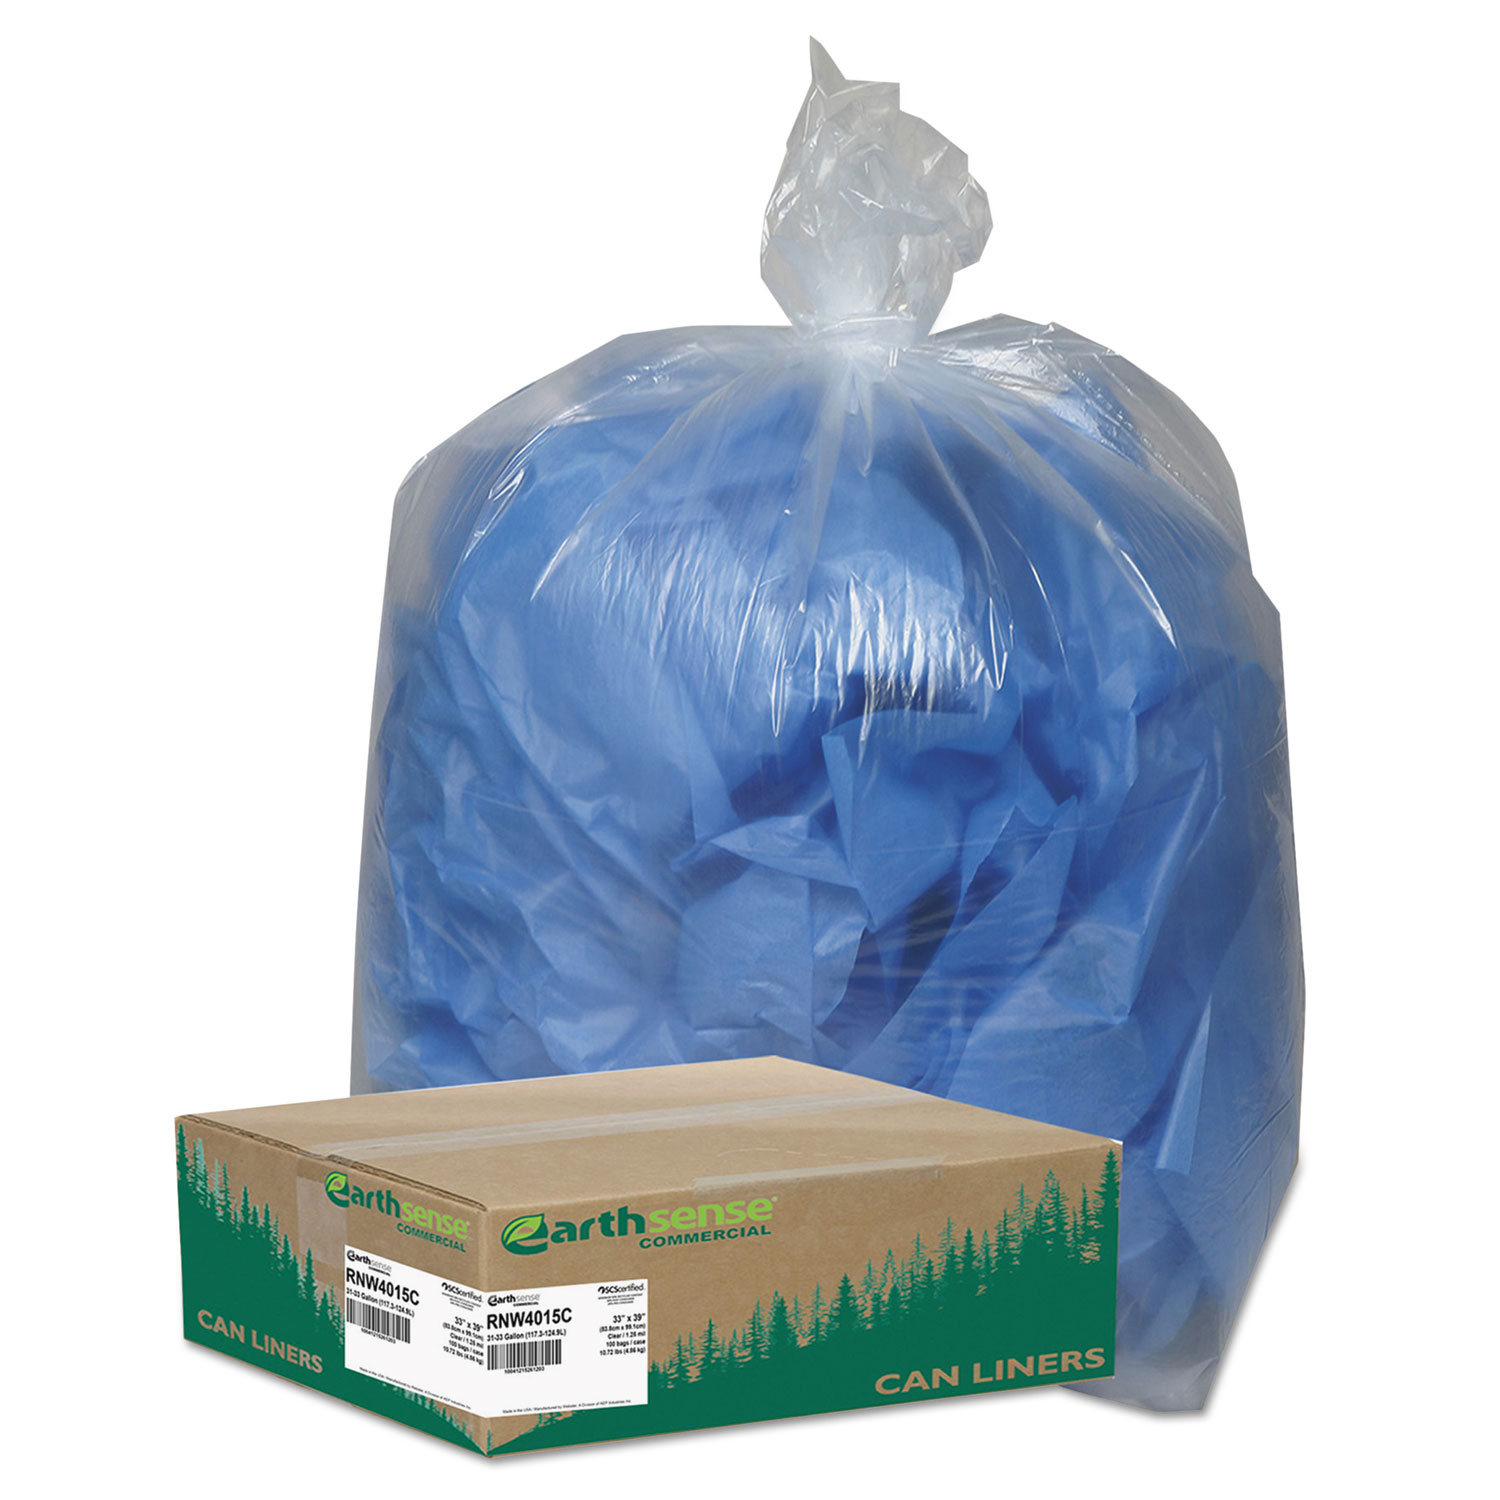  Earthsense Commercial RNW4015C Linear Low Density Clear Recycled Can Liners, 33 gal, 1.25 mil, 33 x 39, Clear, 100/Carton (WBIRNW4015C) 